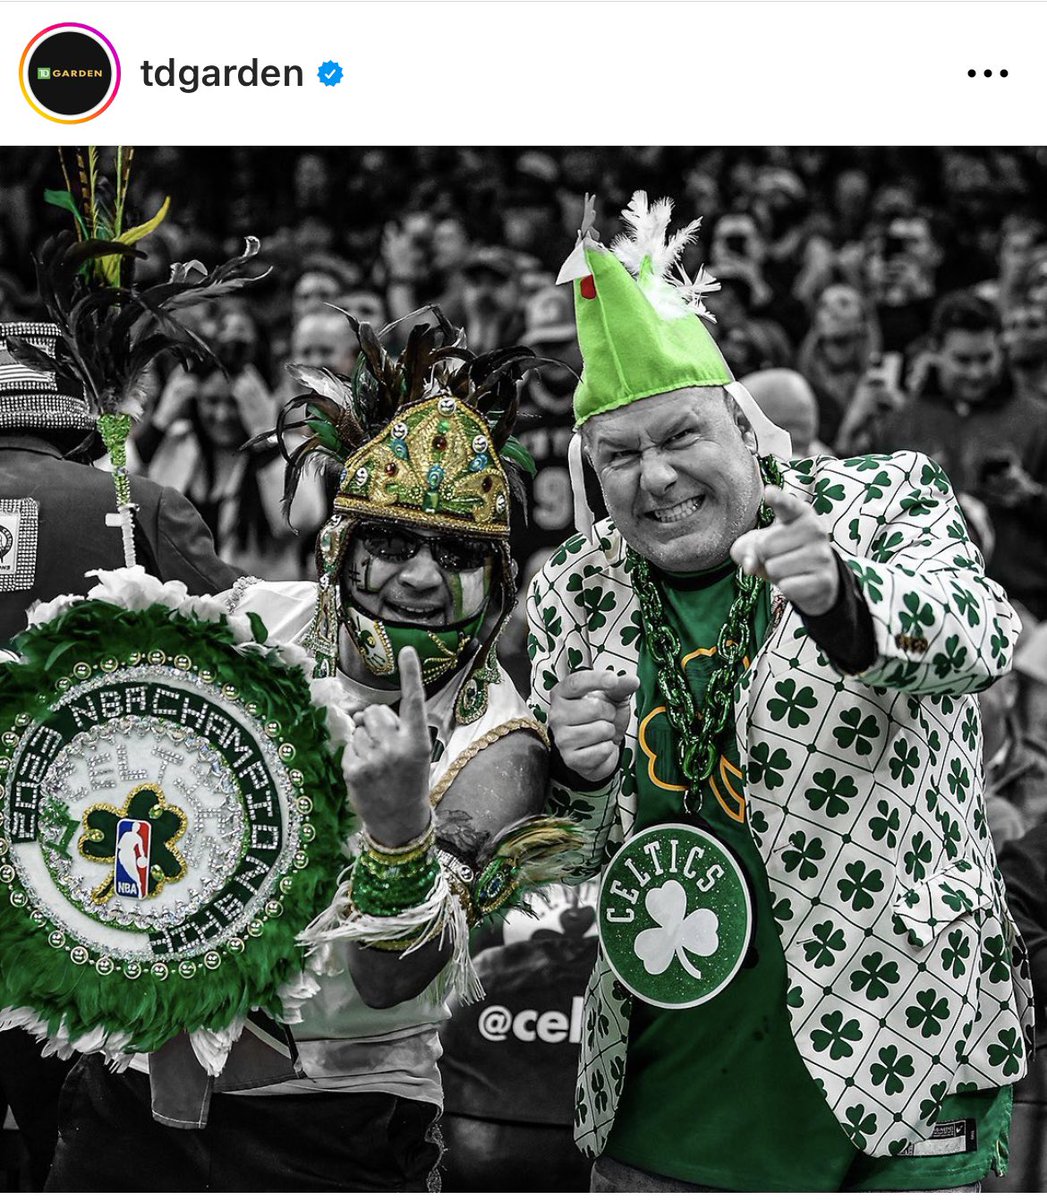 The Miami fans are over confident just like Jimmy Buckets and will invade TD Garden tonight!
Only one thing to say to Celtics Nation and the best fans in the NBA this morning! Make the Jungle Loud and 
DEFENDCAUSEWAY!!
#defendcauseway #UnfinishedBusiness 
☝️☝️☝️☝️☝️☘️☘️🔥🔥🔥🔥